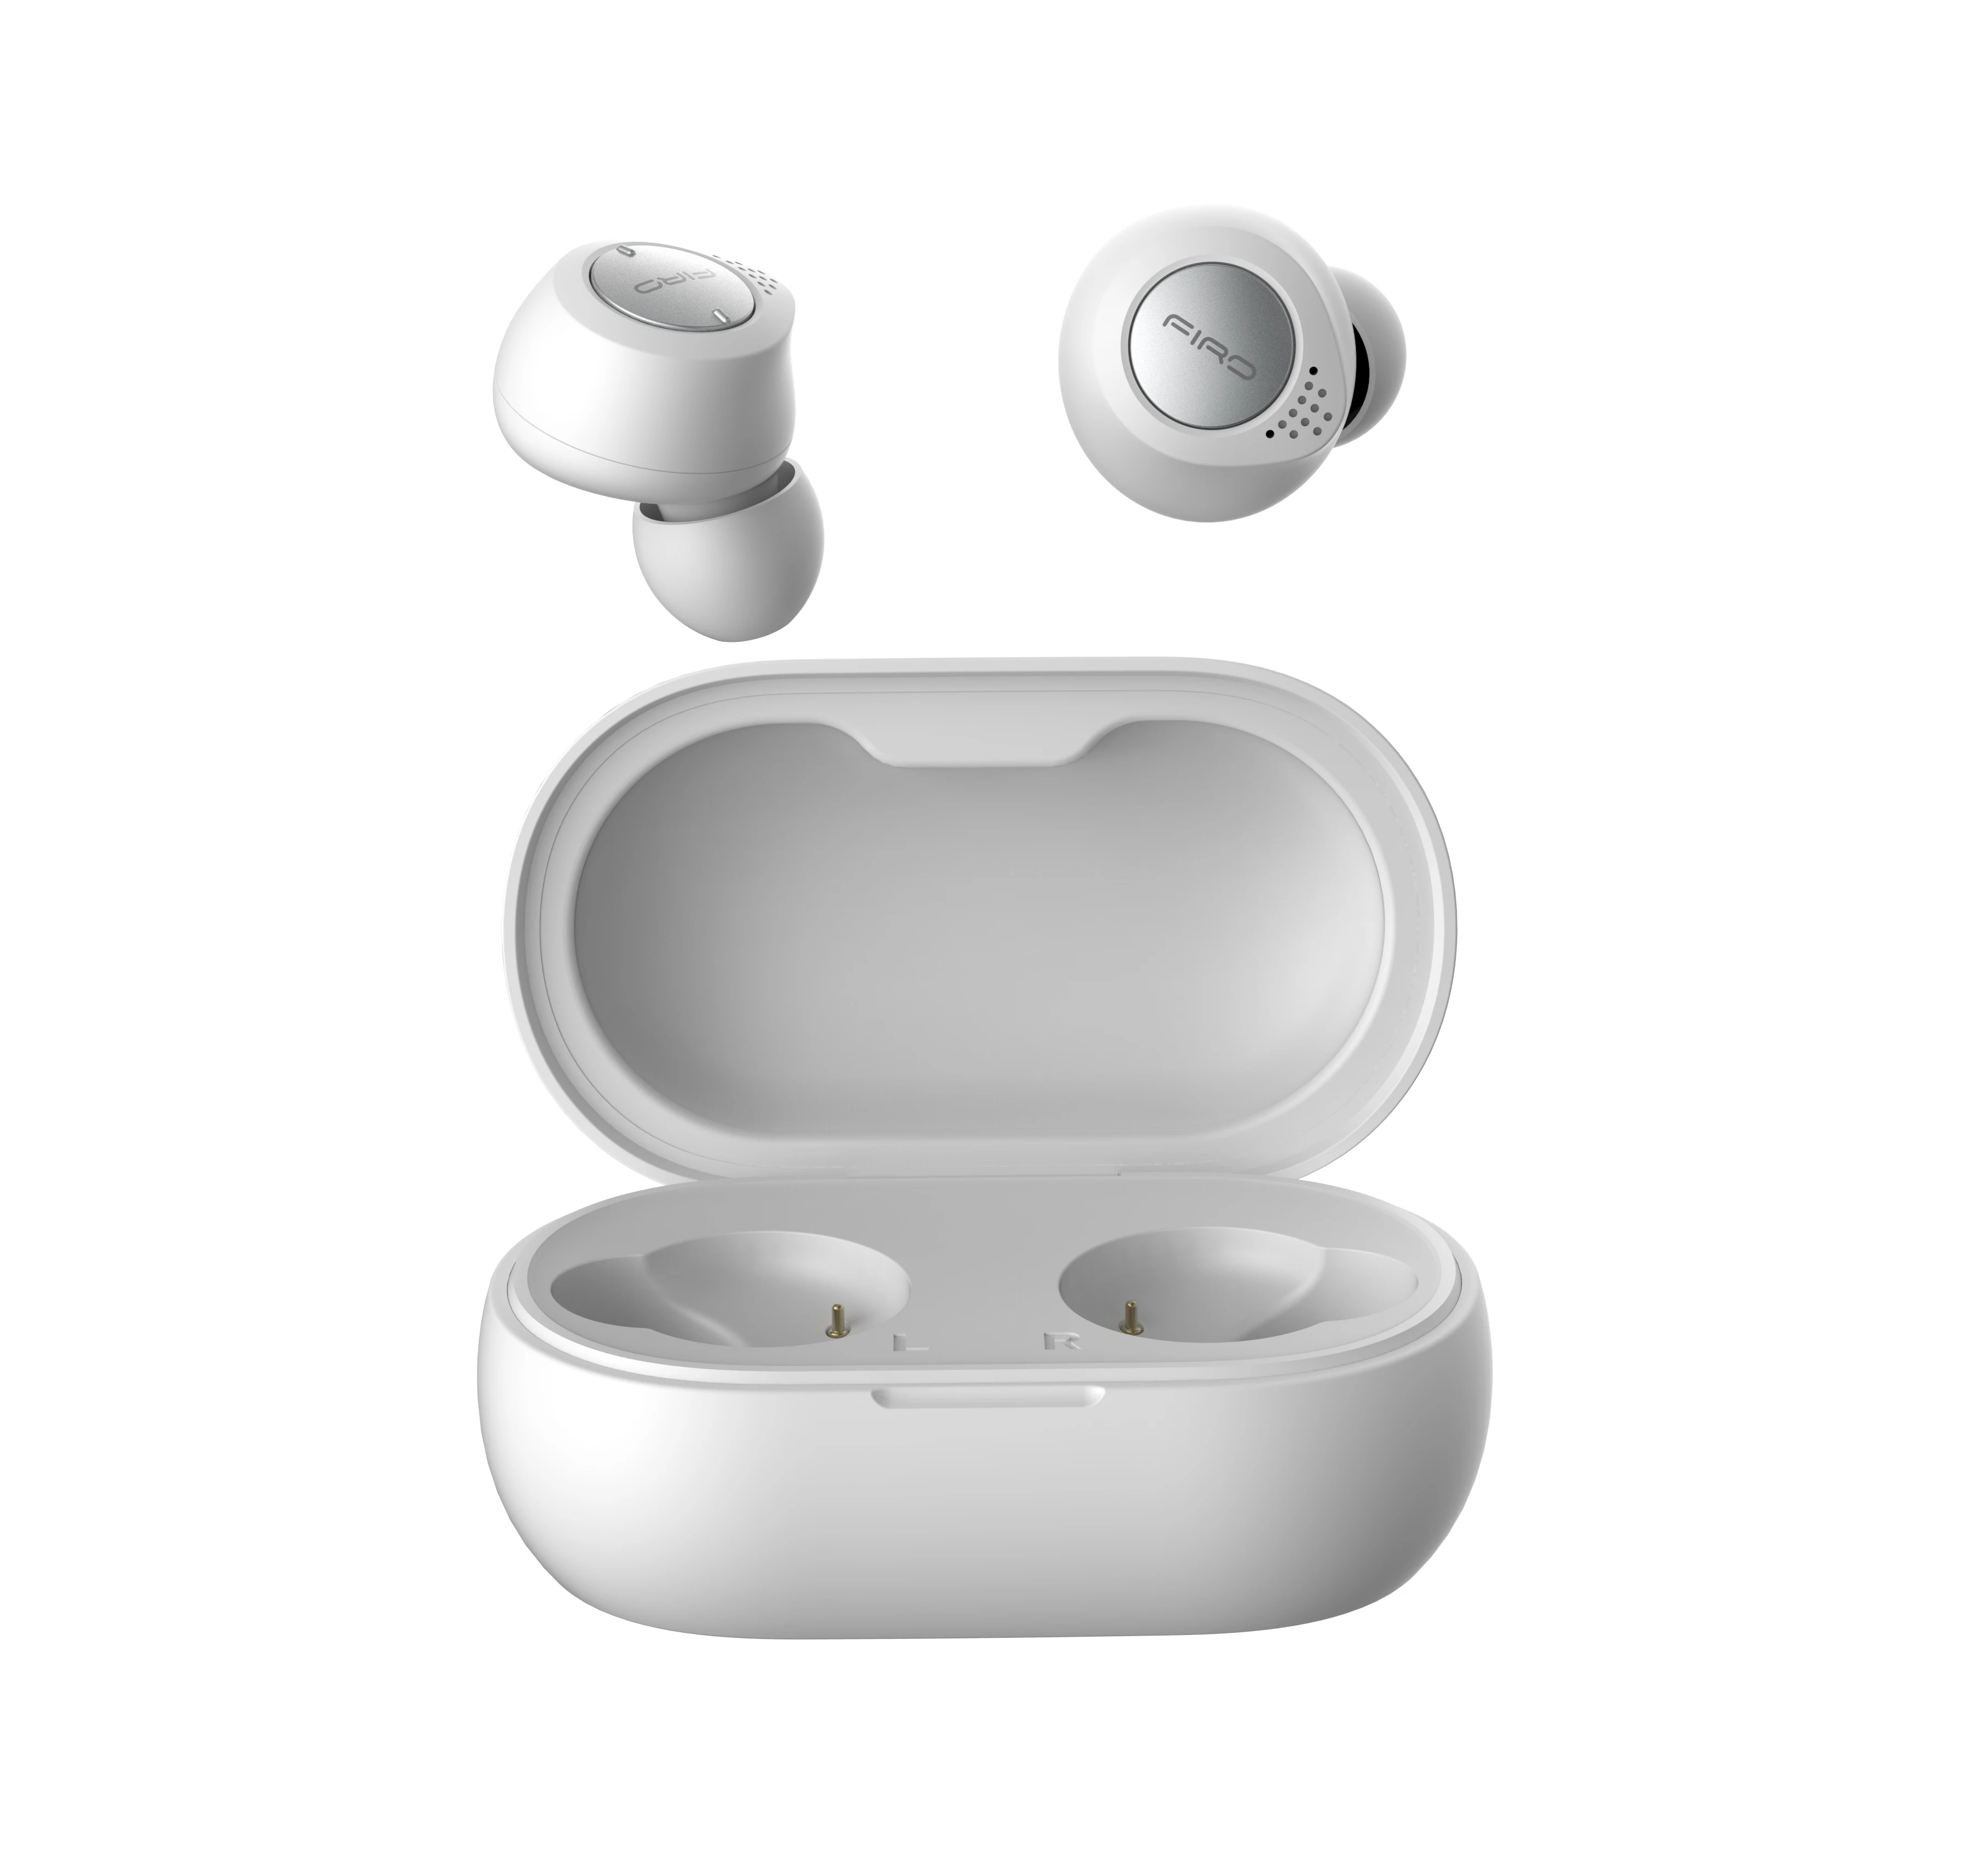 

Wireless Earbuds Noise Cancelling TWS Ear Buds with Microphone and True BT 5.0 in-Ear Headphones, Ergonomic Bass Stereo